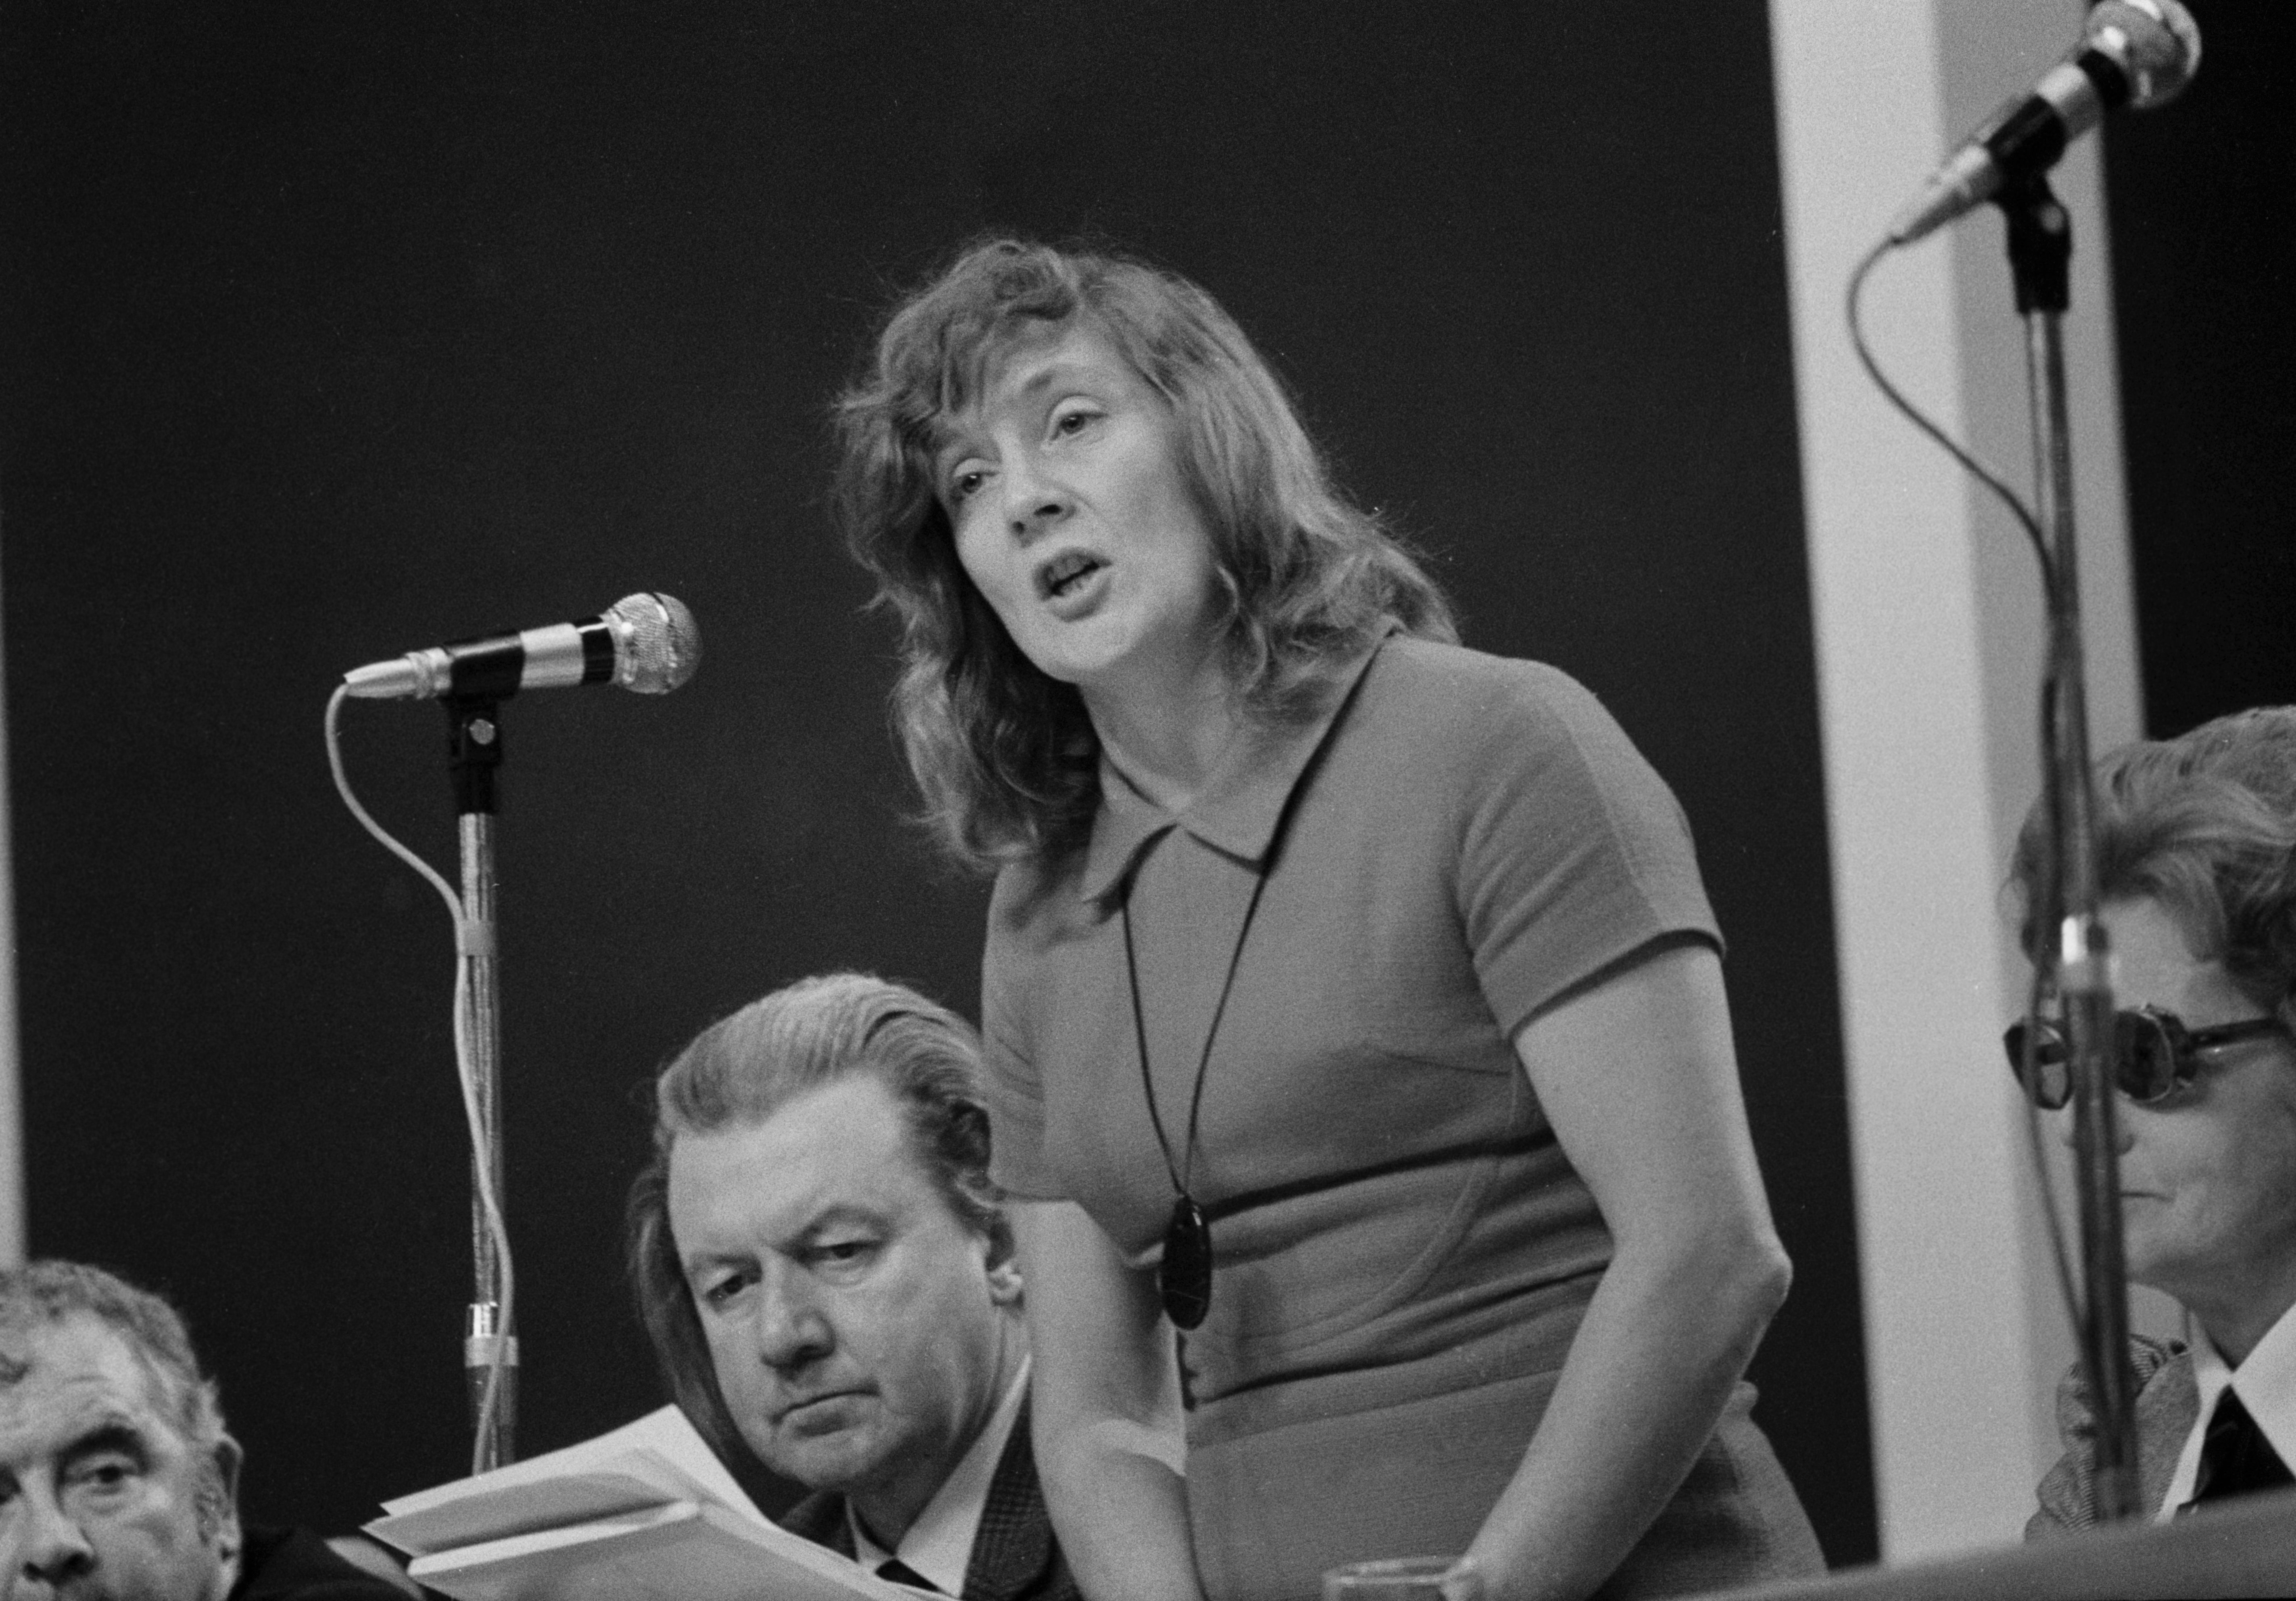 Williams addressing the Labour Party conference in Blackpool in 1972